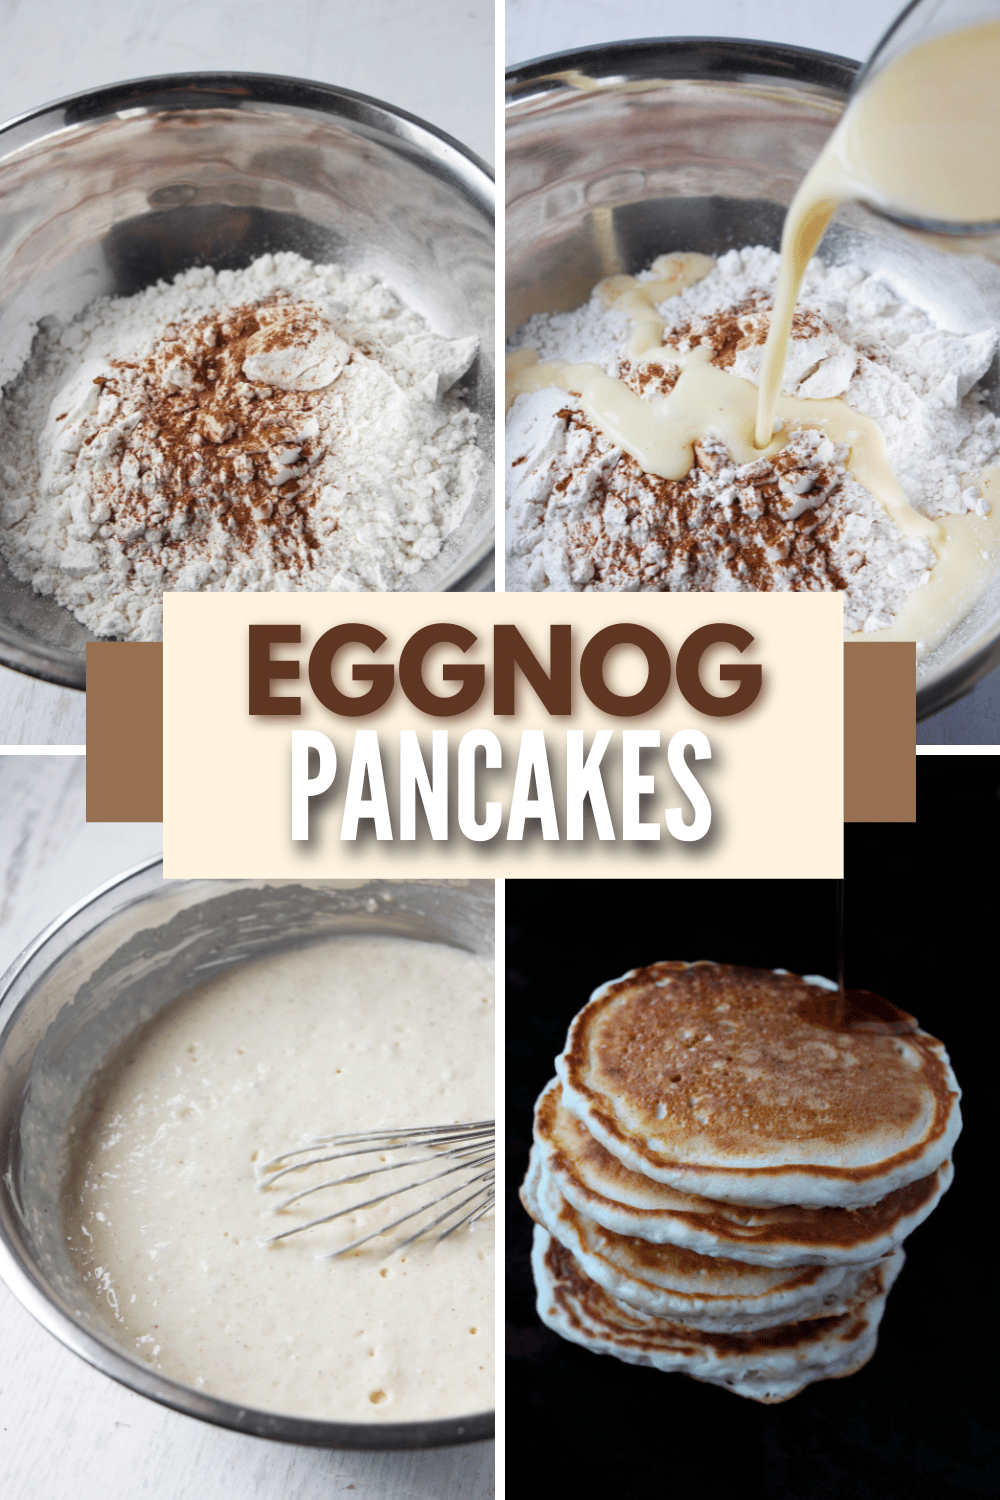 These Eggnog Pancakes are the perfect holiday breakfast! Serve them with whipped cream and cinnamon for a festive morning treat. #eggnogpancakes #holidaybreakfast #pancakes #breakfast via @wondermomwannab